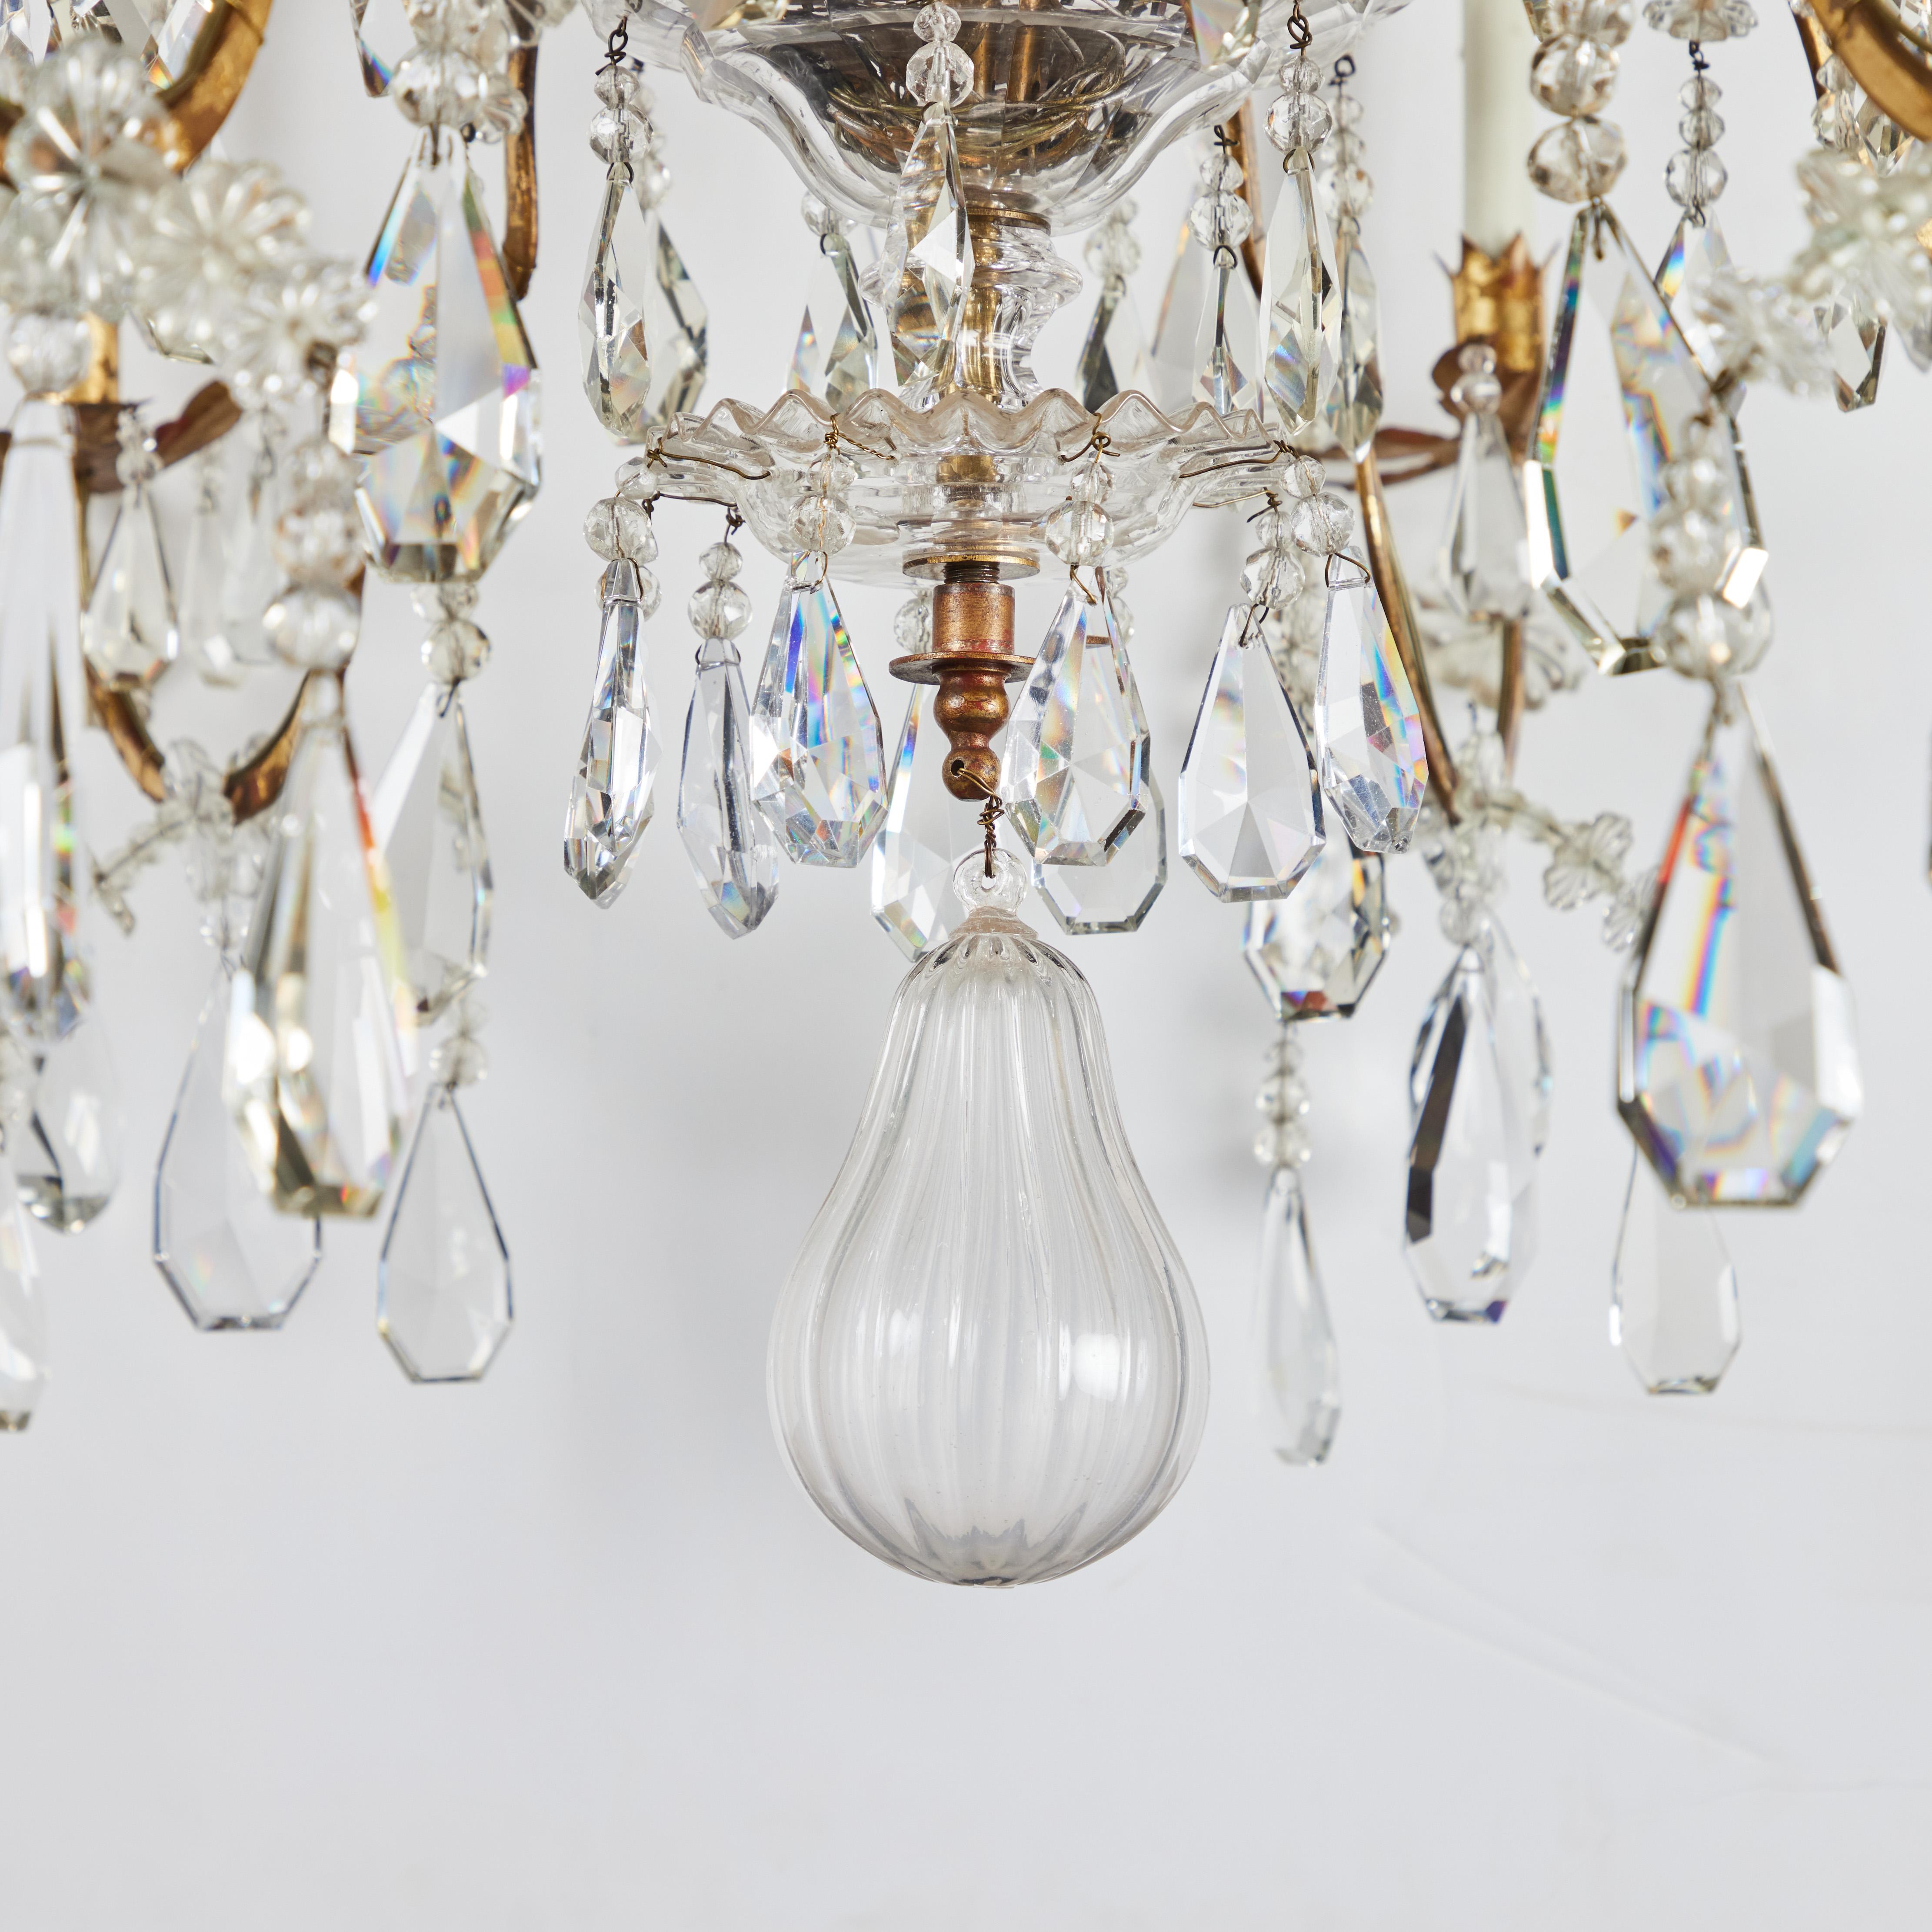 Elegant Cut Crystal and Gilded Tole Chandelier In Good Condition For Sale In Newport Beach, CA